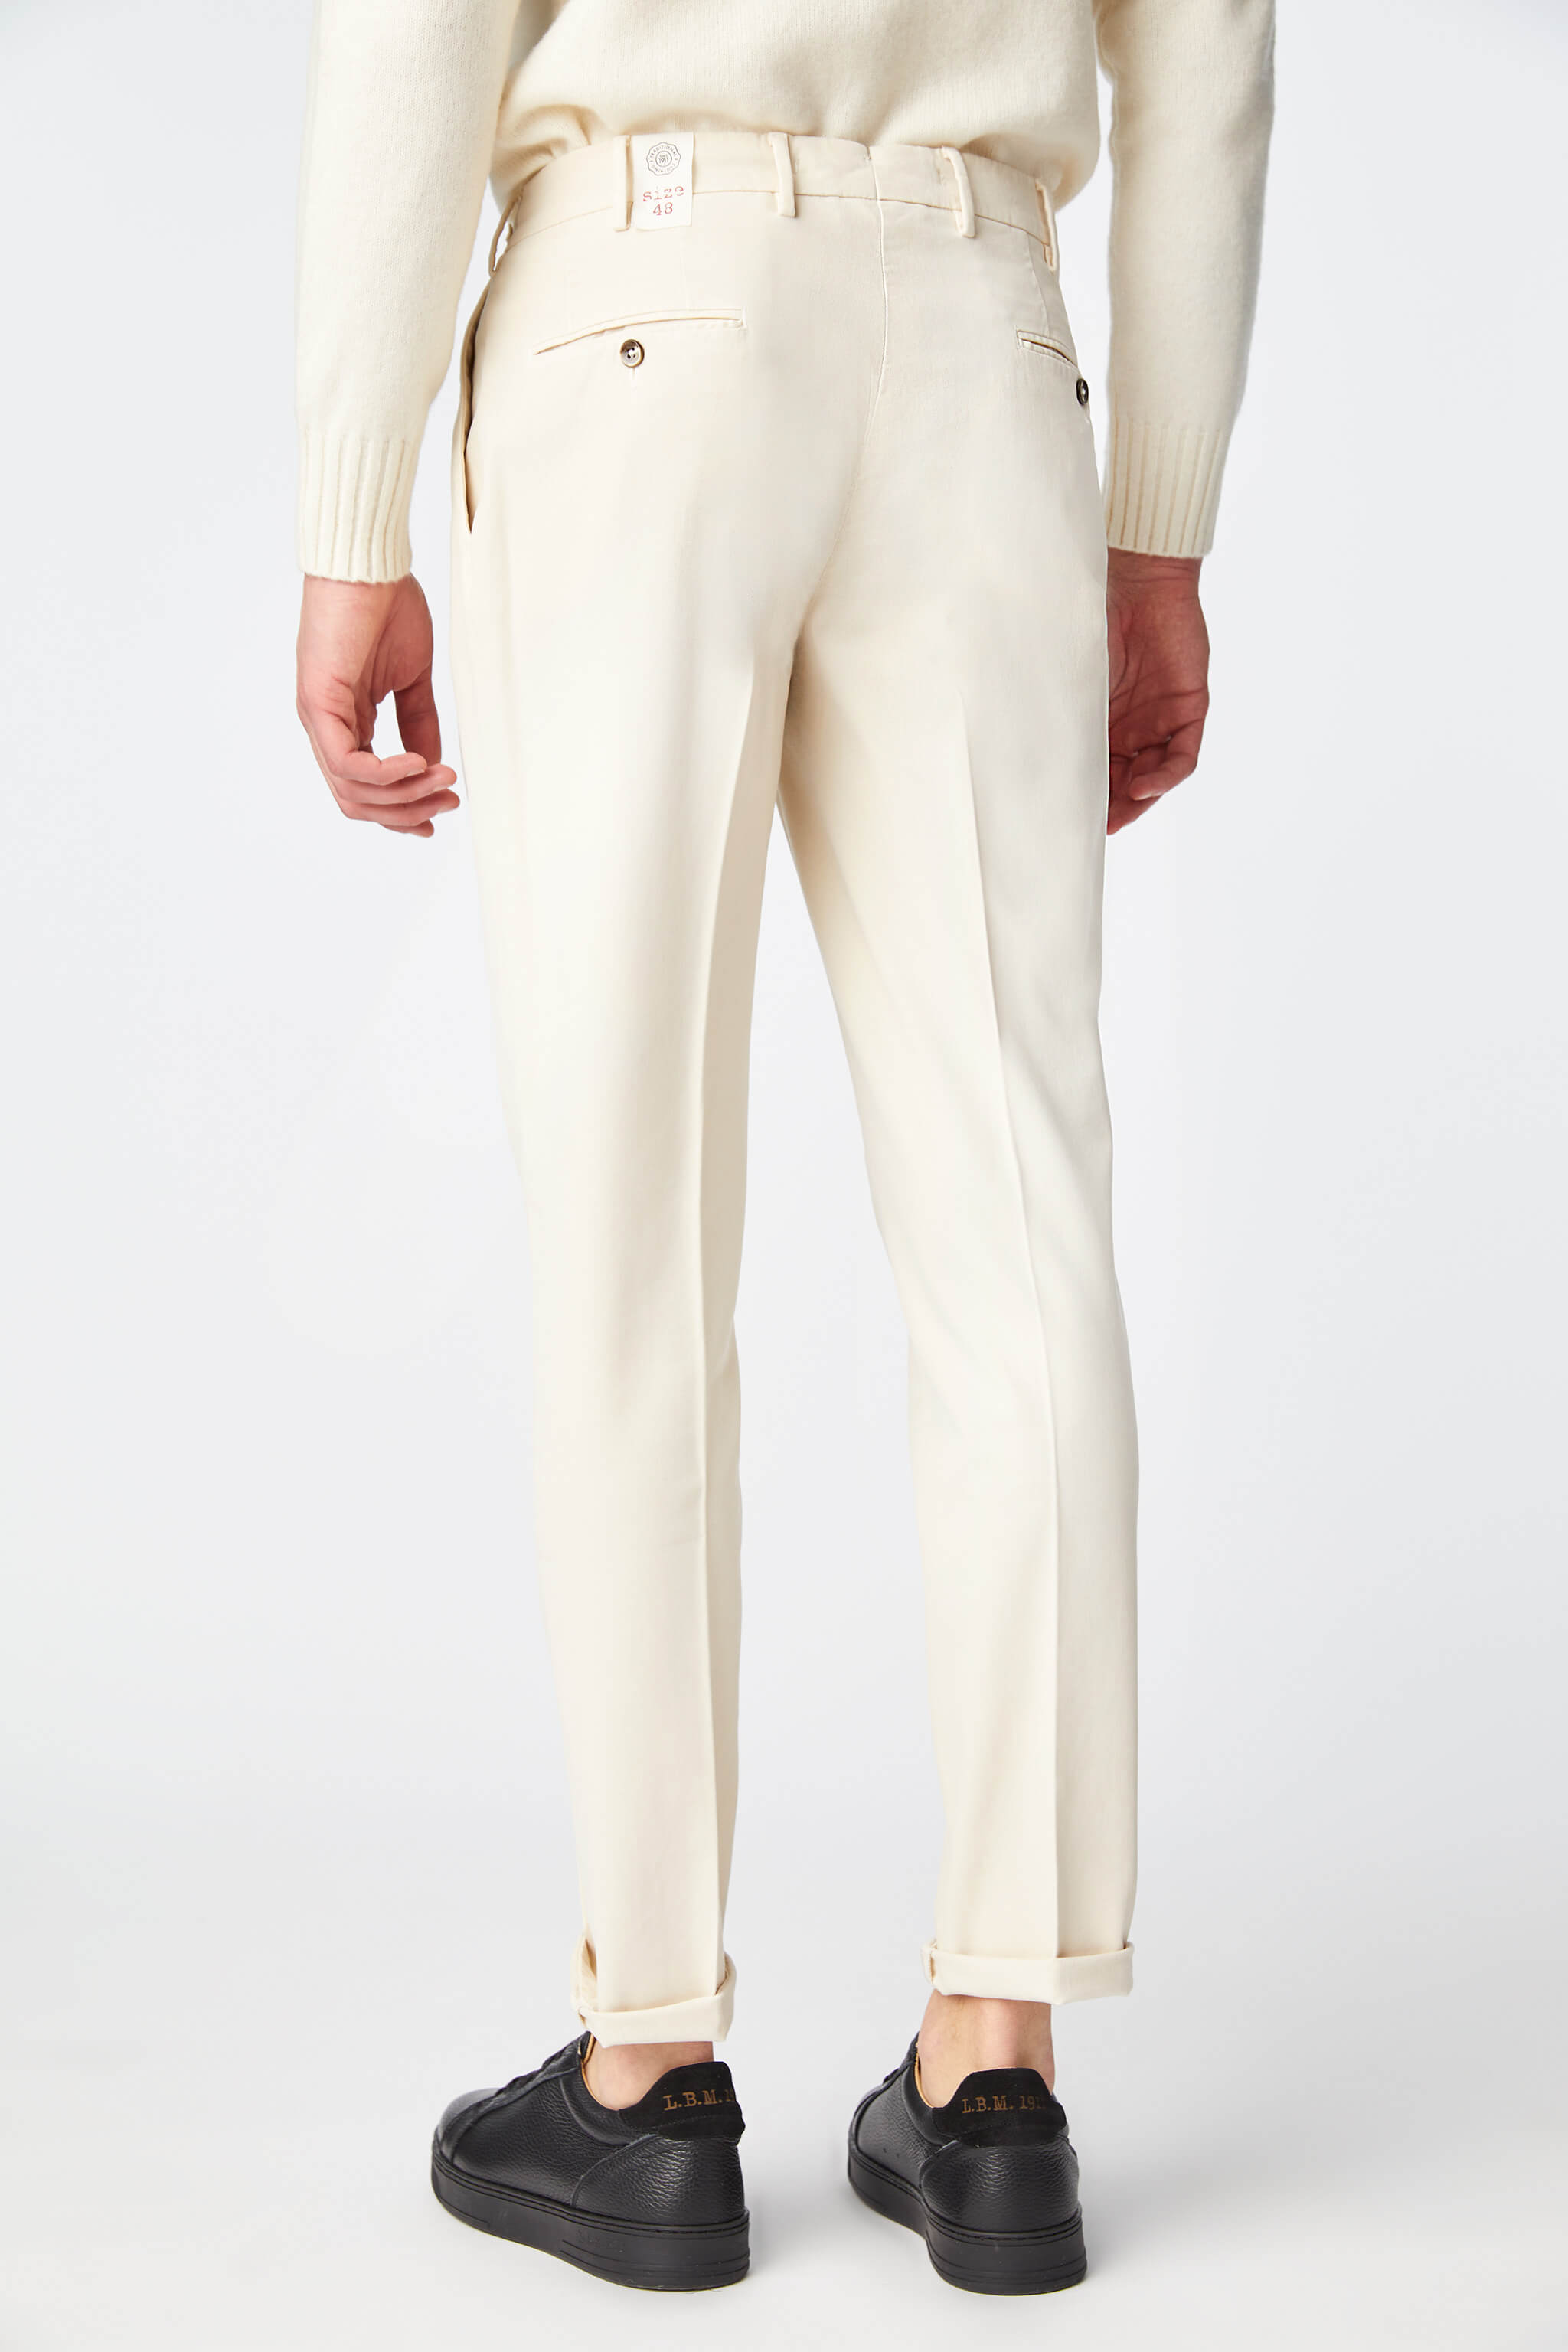 Garment-dyed MUDDY pants in white